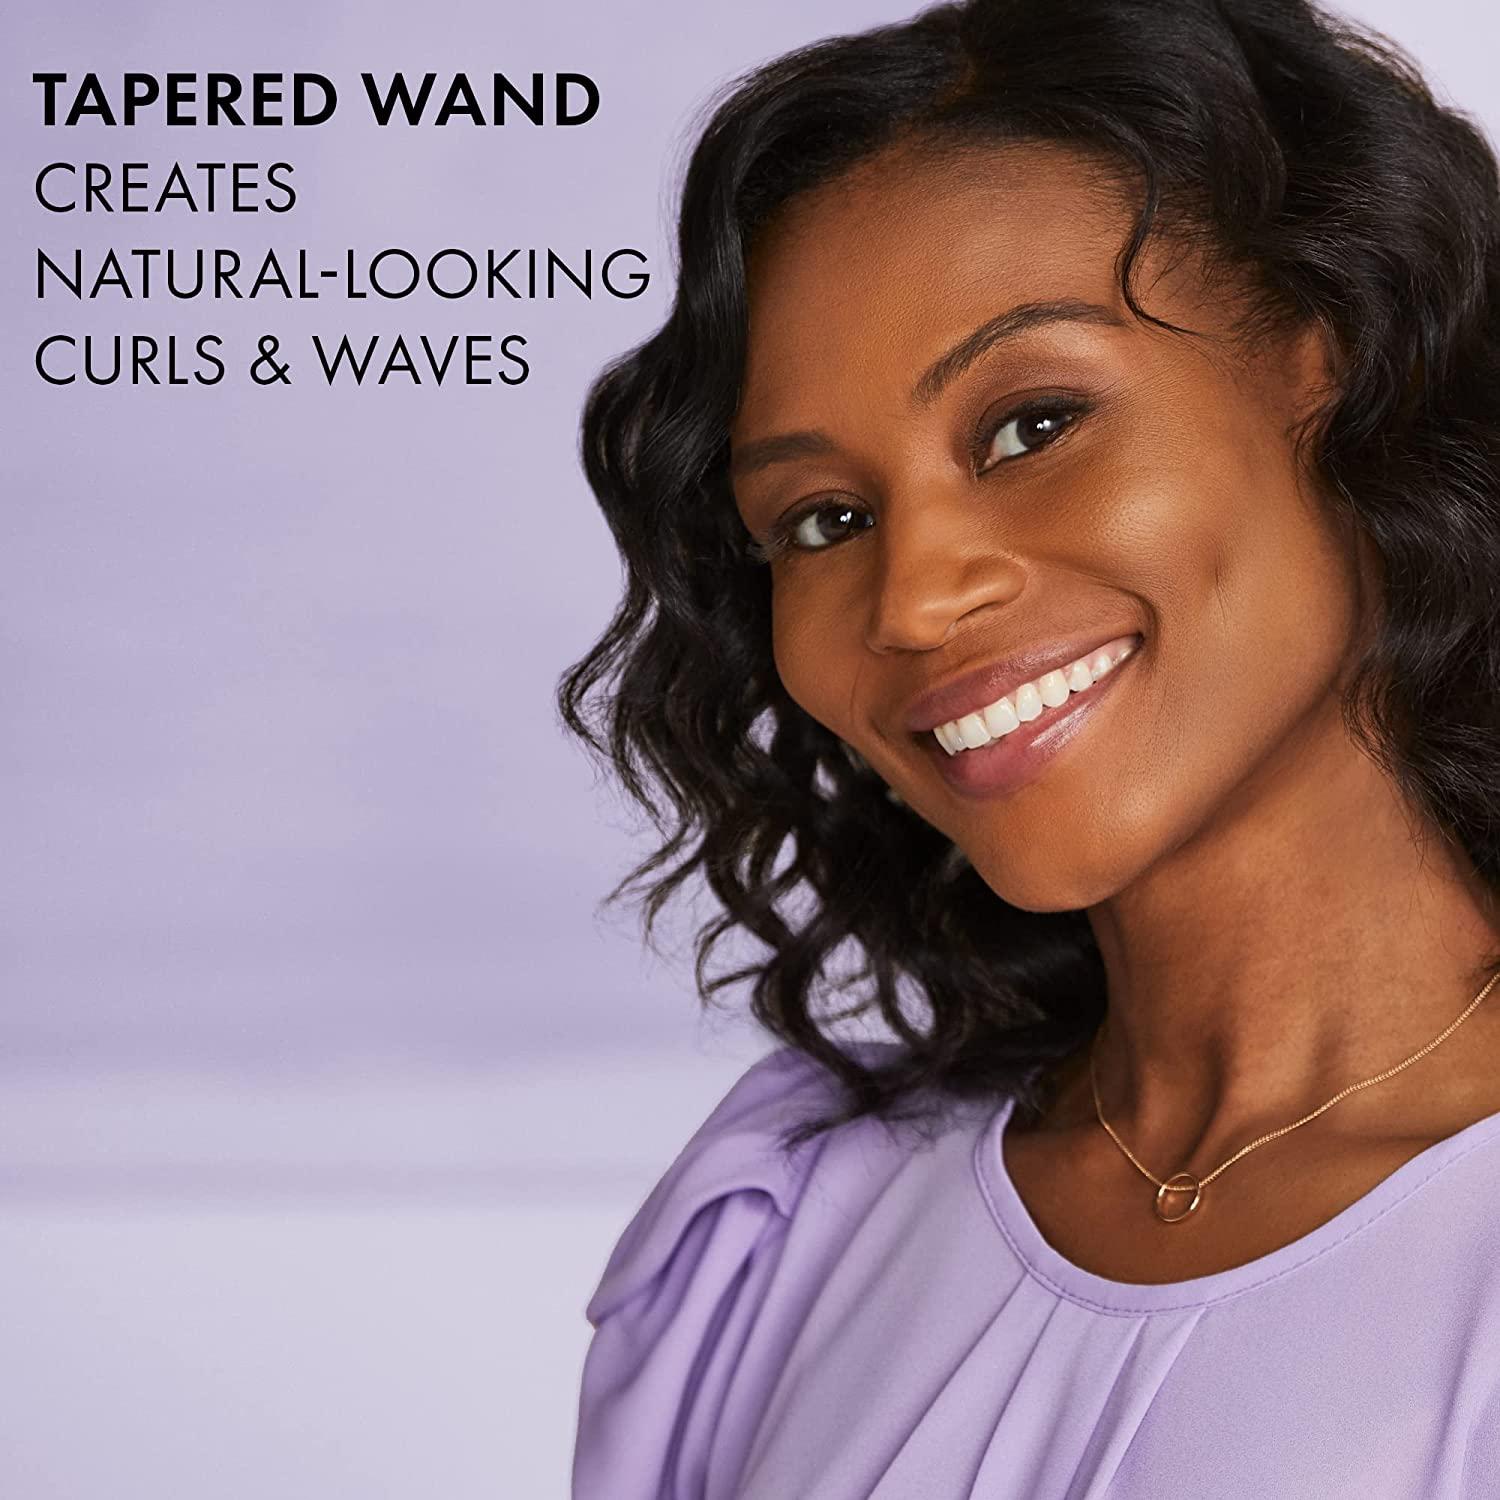 Hot Tools 1 1/4 Tapered Curling Iron